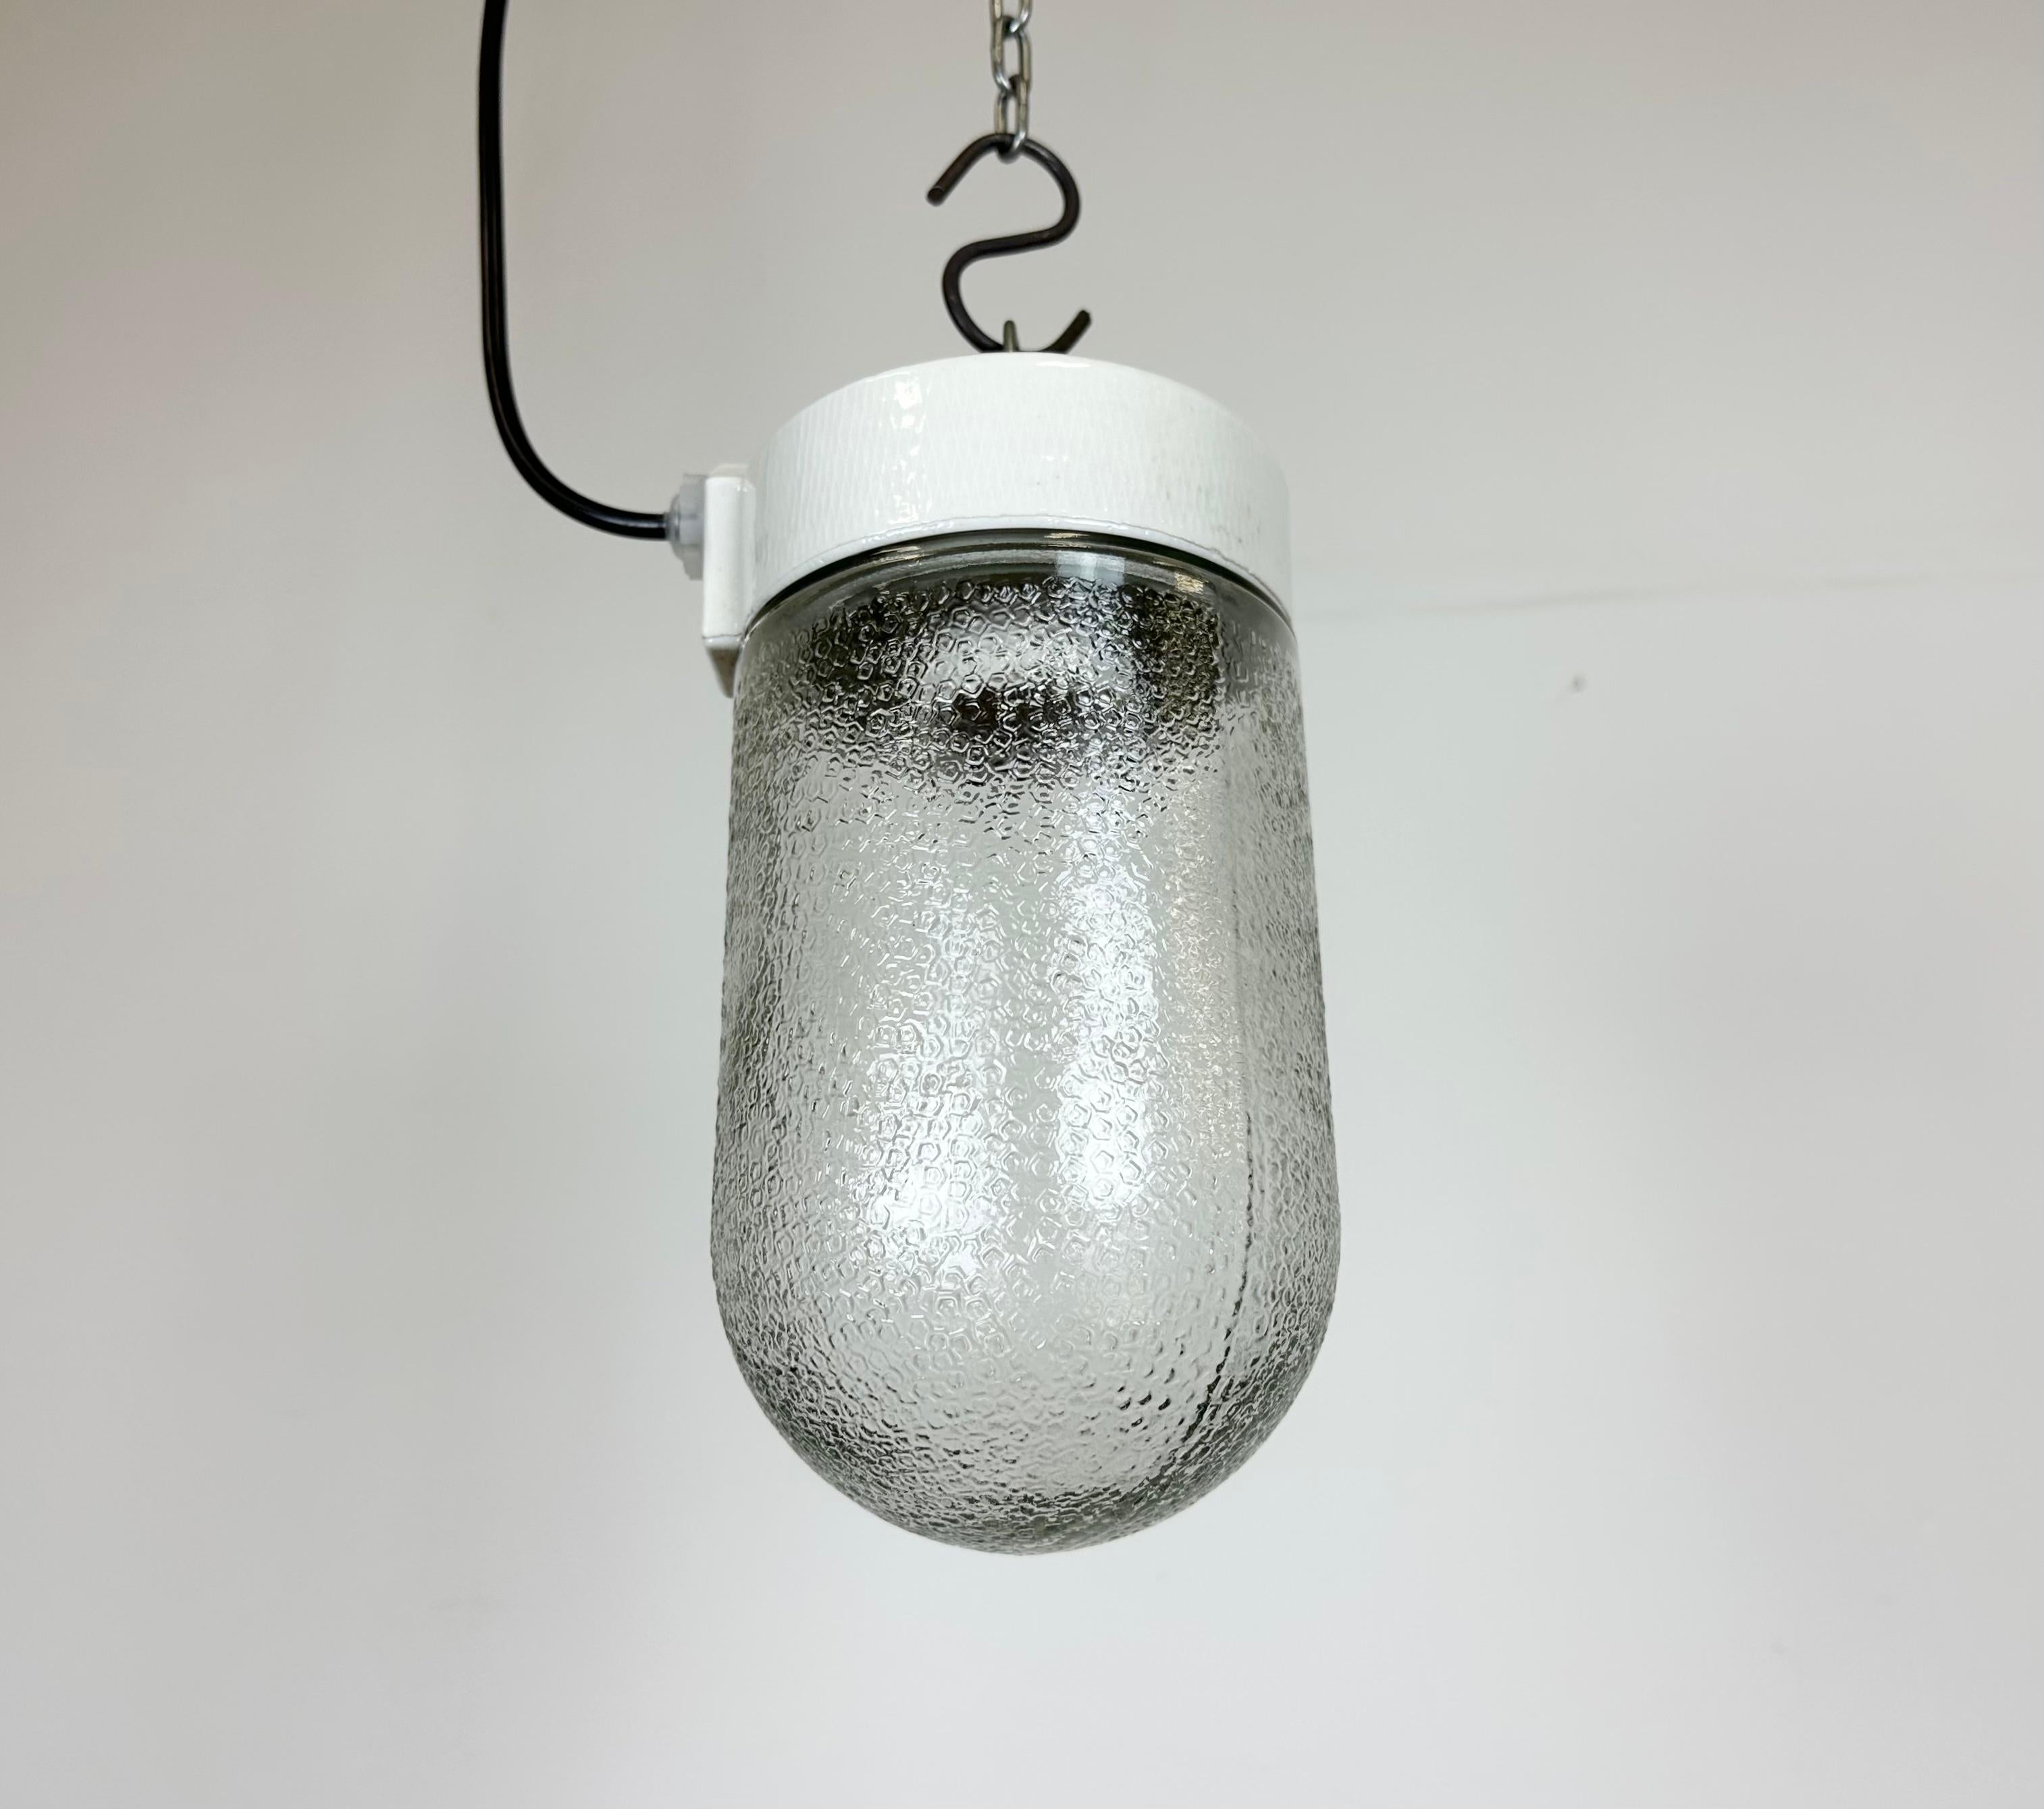 Vintage White Porcelain Pendant Light with Frosted Glass, 1970s For Sale 2